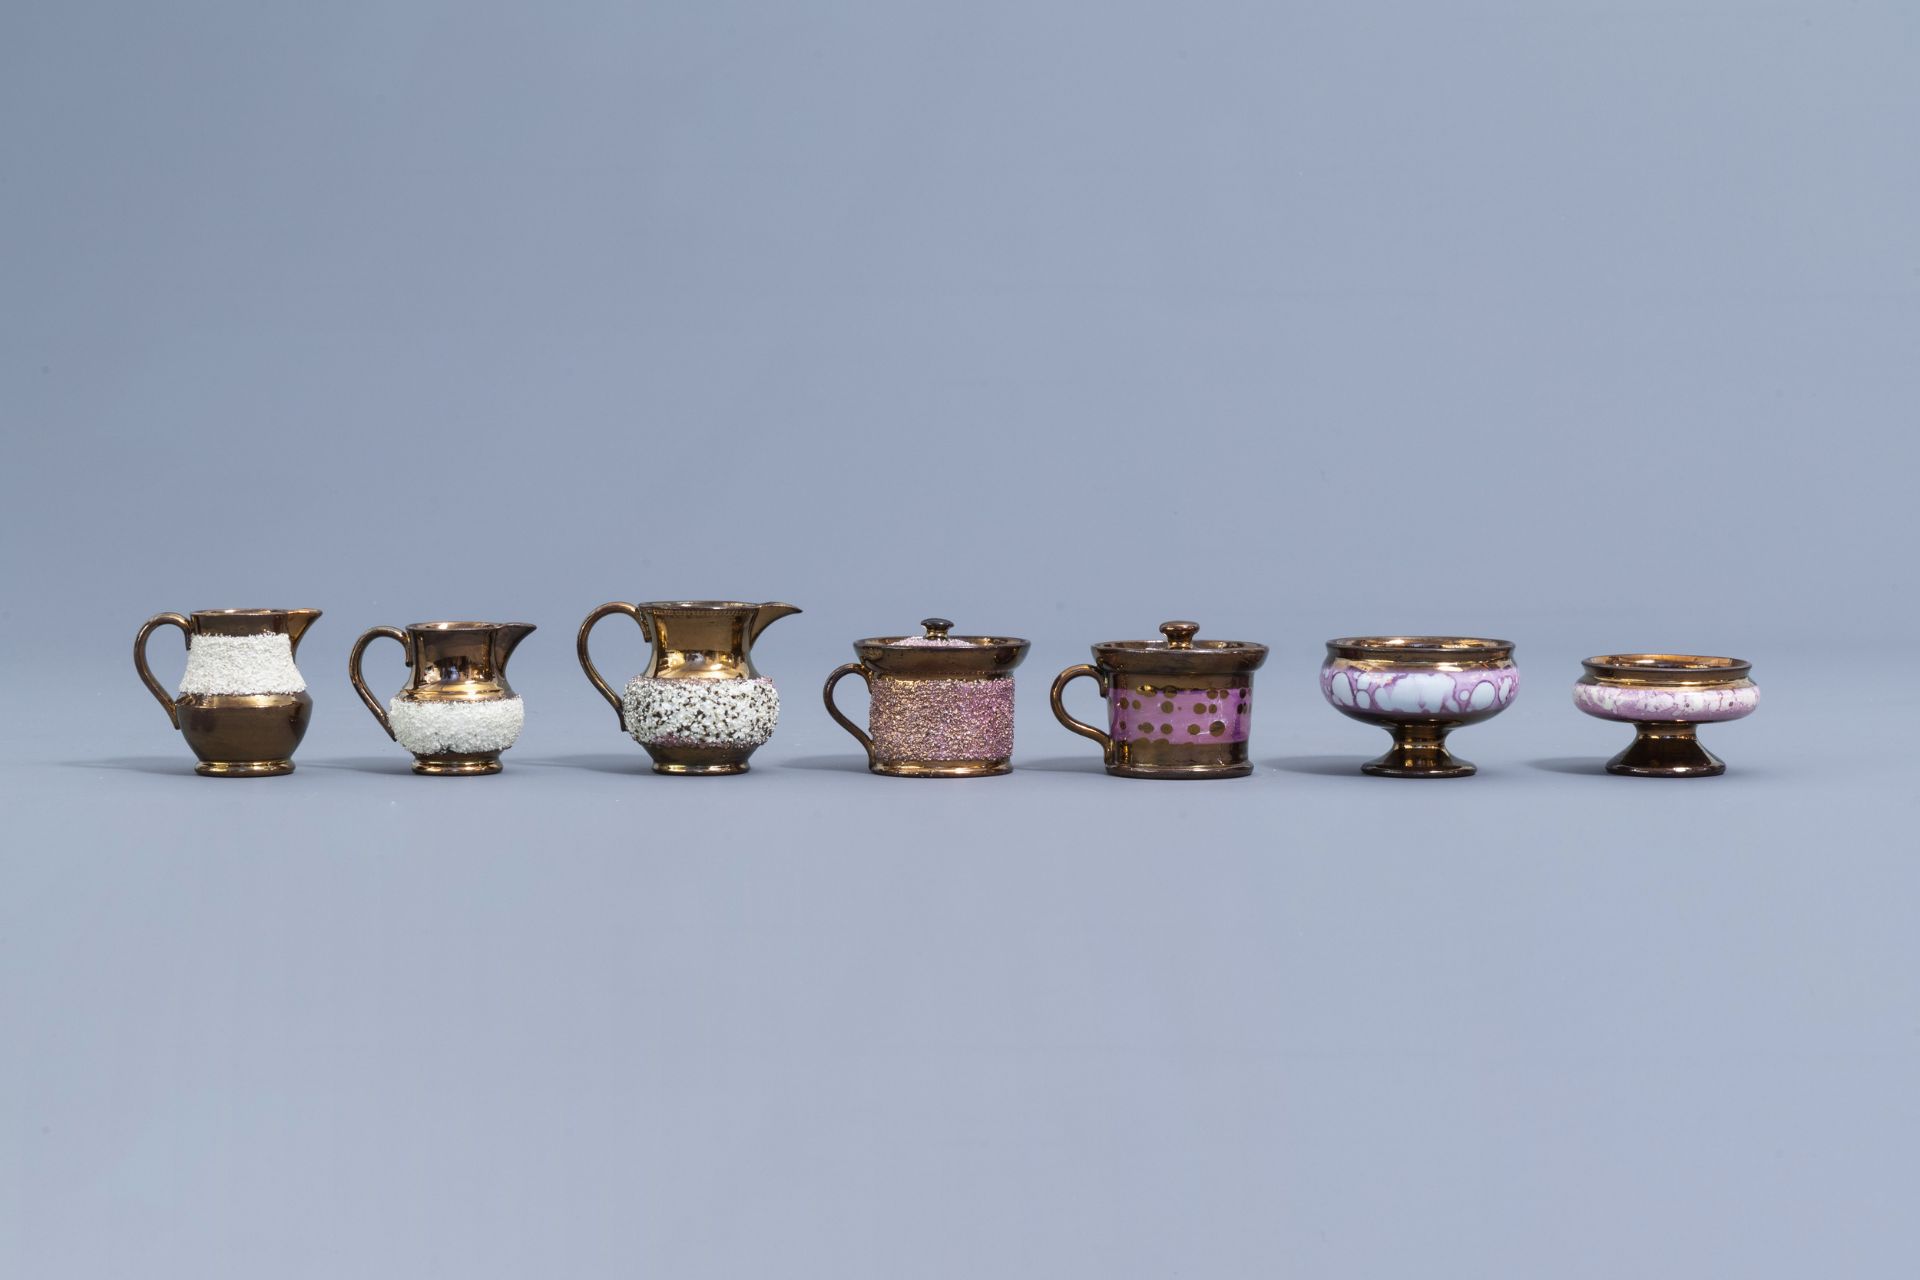 A varied collection of English lustreware items, 19th C. - Image 3 of 42